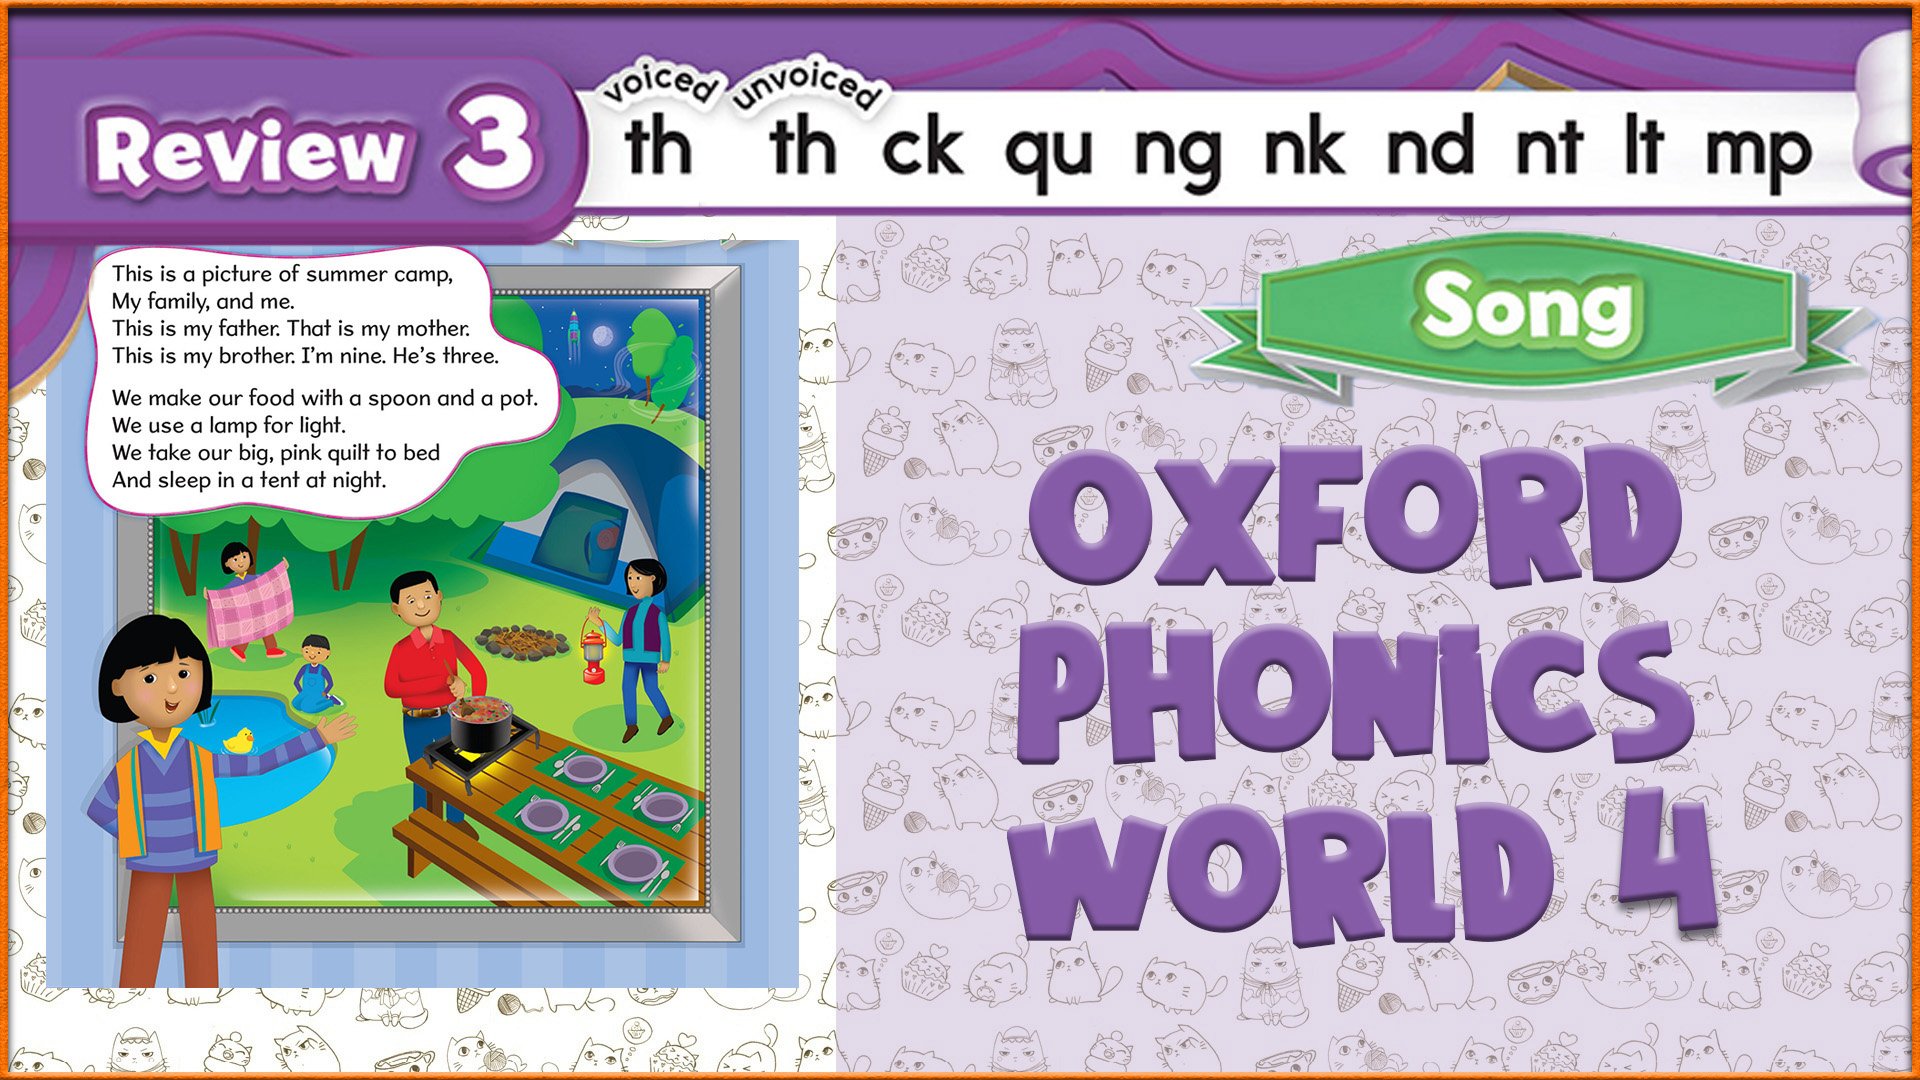 Song | Review 3 | Oxford Phonics World 4 - Consonant Blends. #41